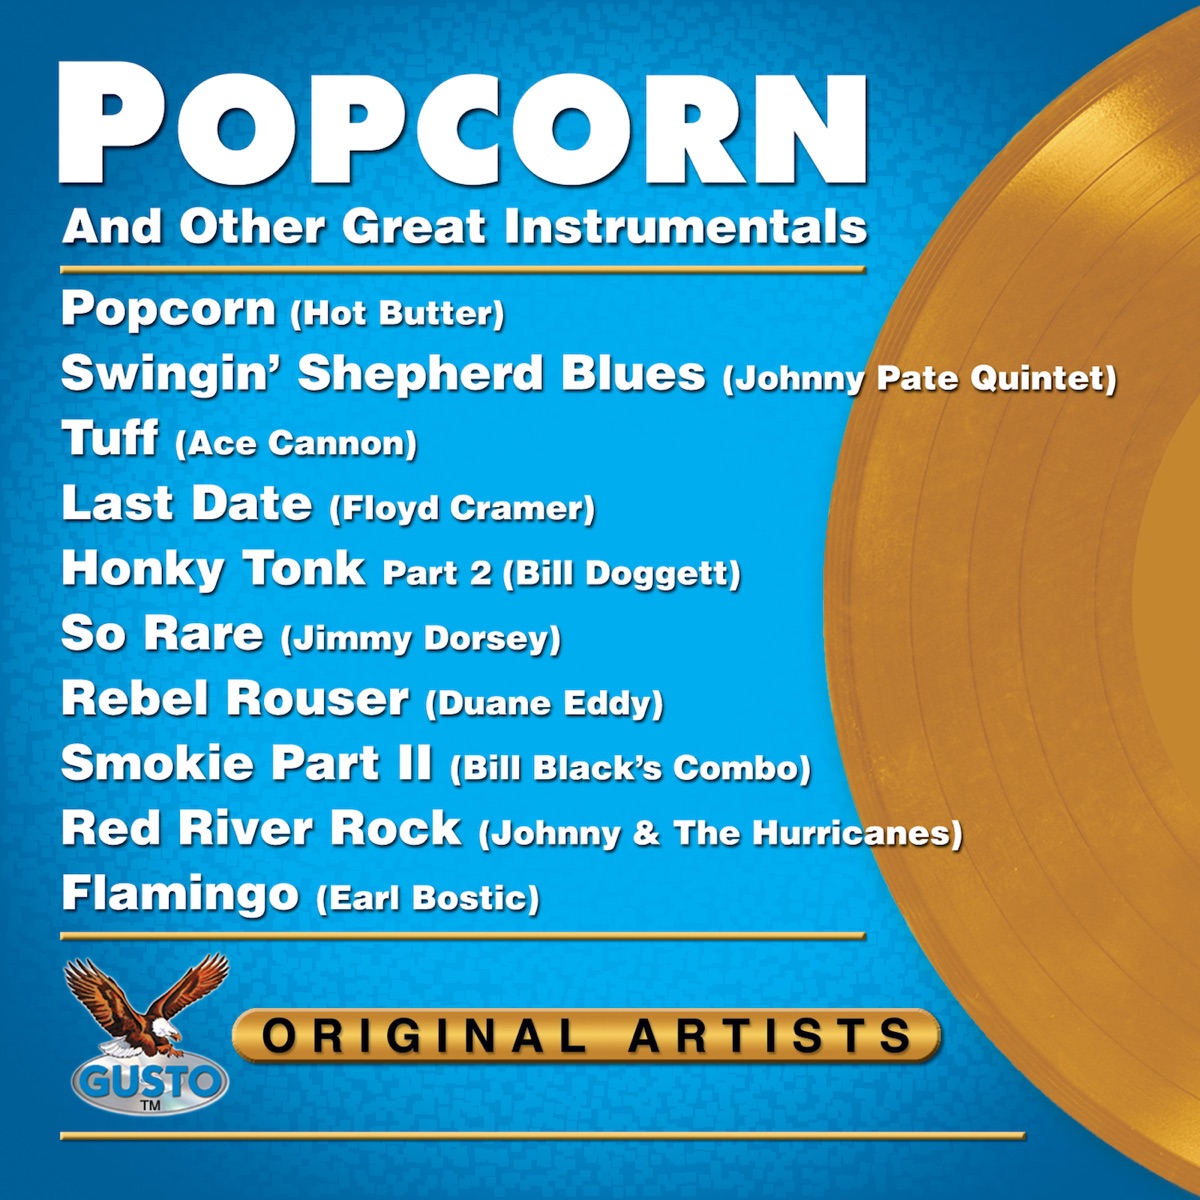 Popcorn and Other Great Instrumentals by Various Artists on Apple Music